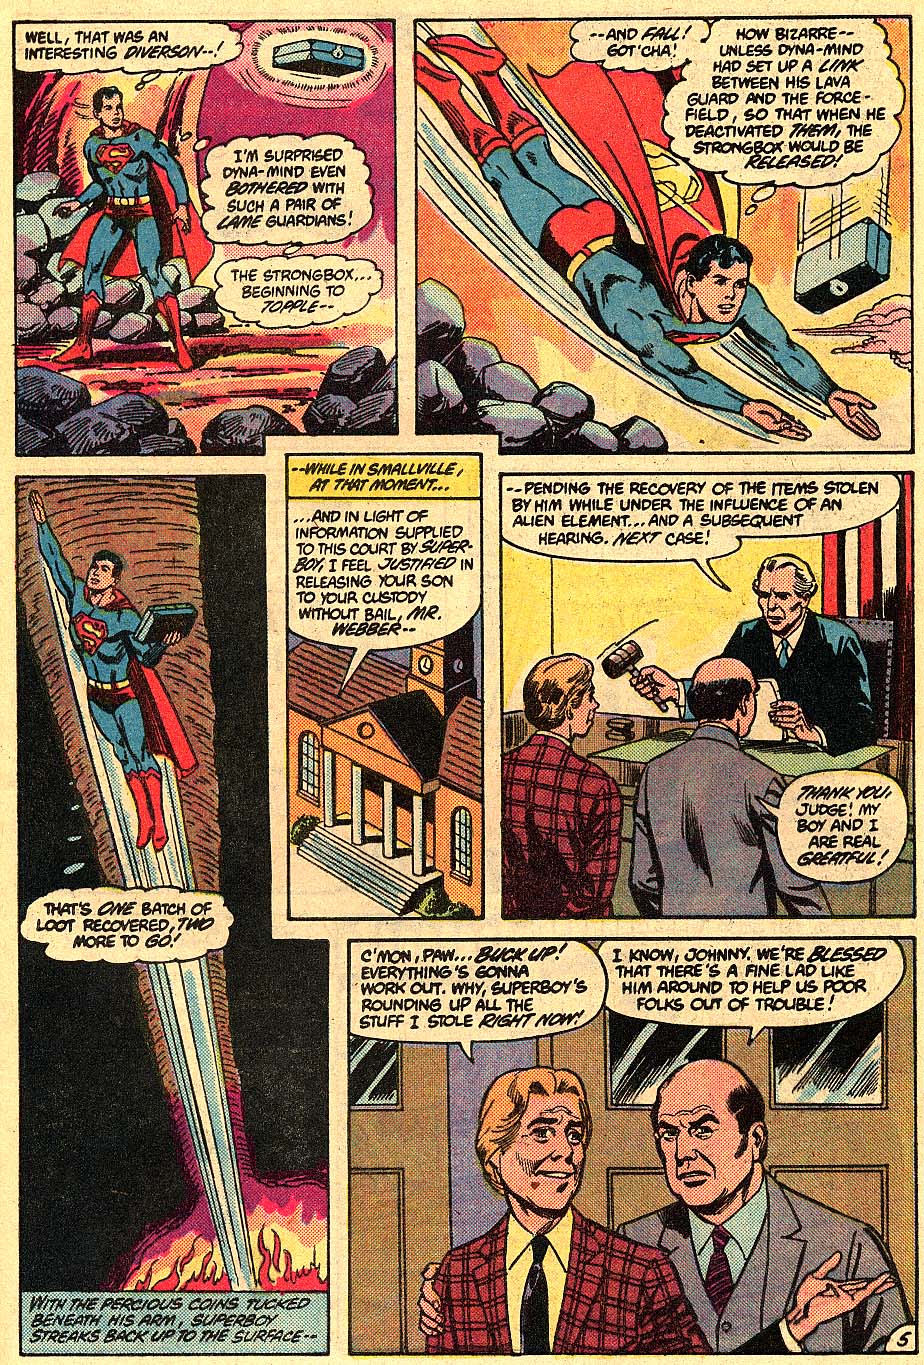 The New Adventures of Superboy 44 Page 5